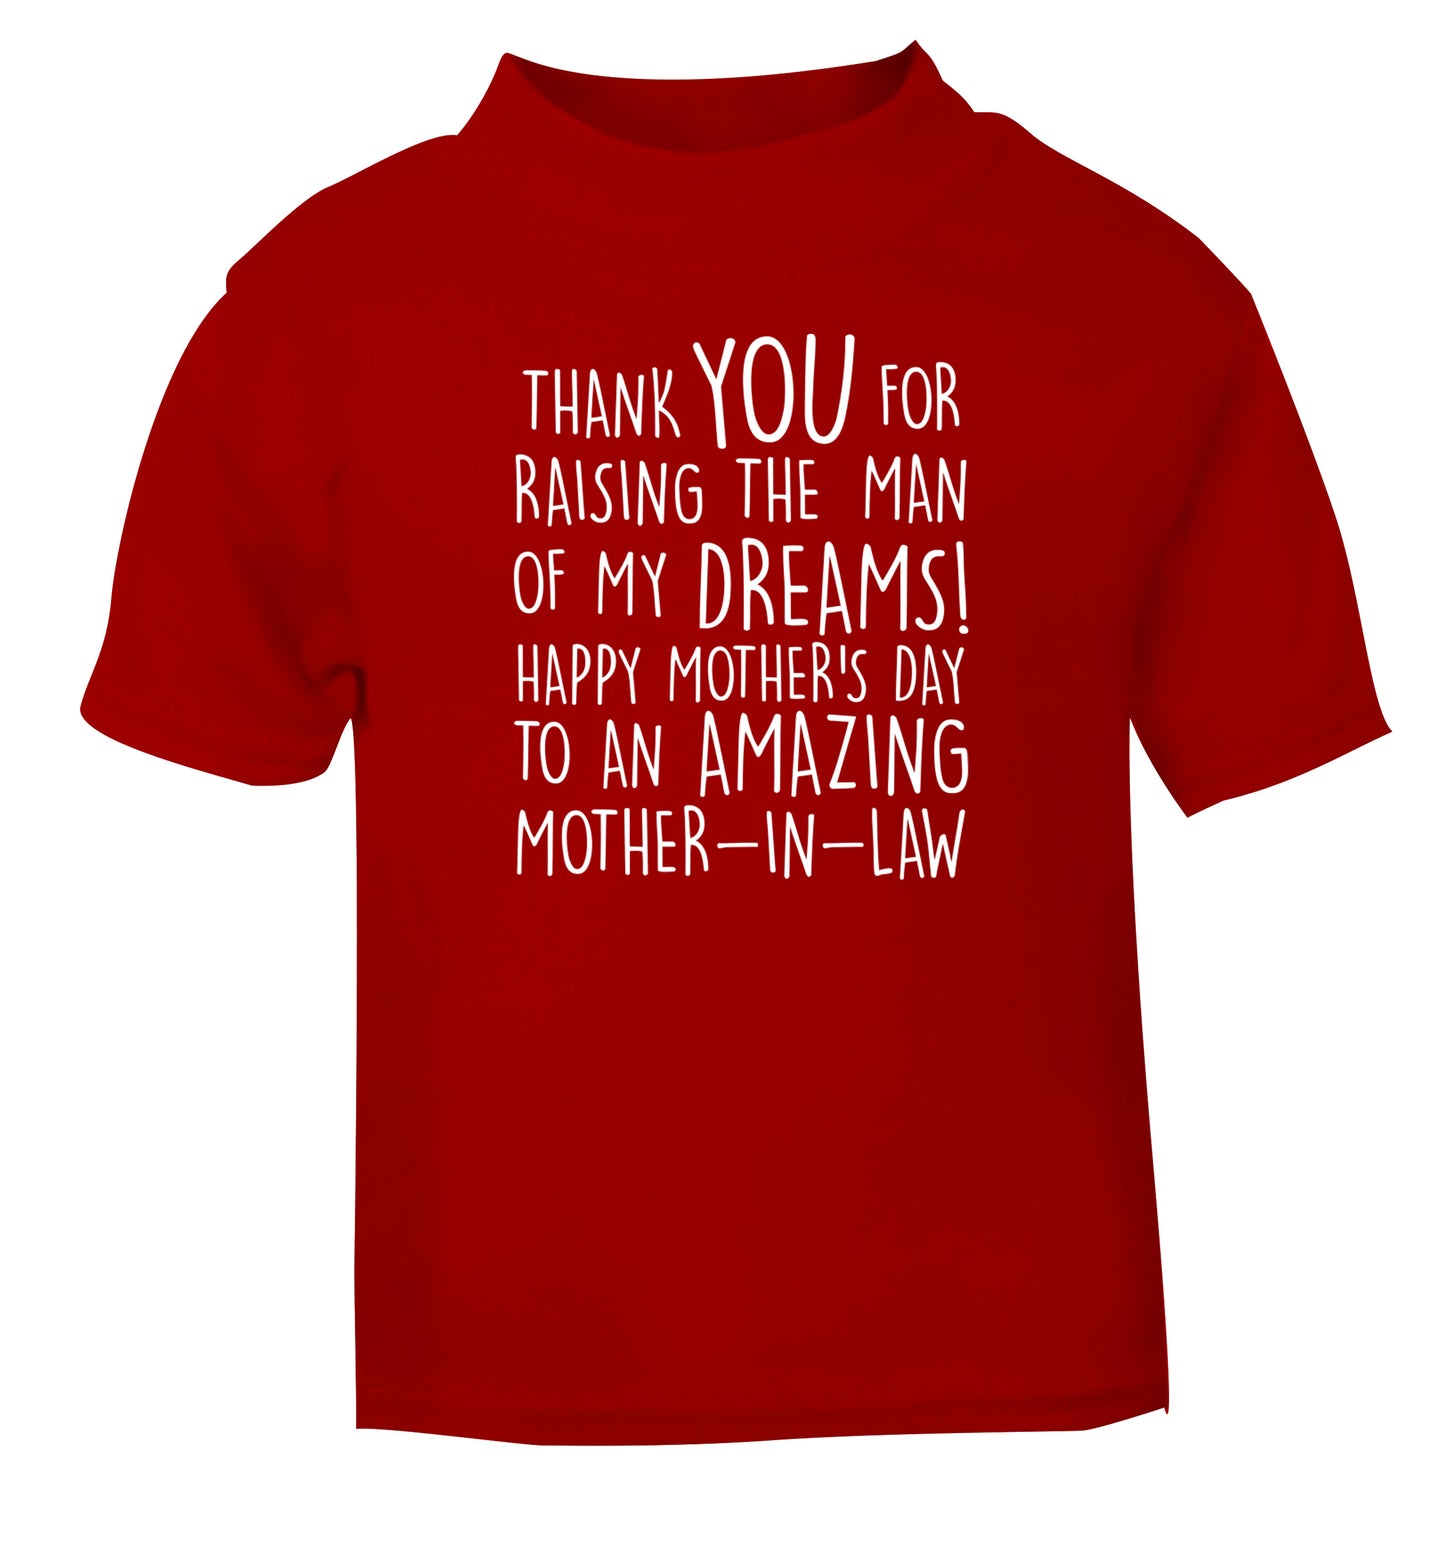 Thank you for raising the man of my dreams happy mother's day mother-in-law red Baby Toddler Tshirt 2 Years